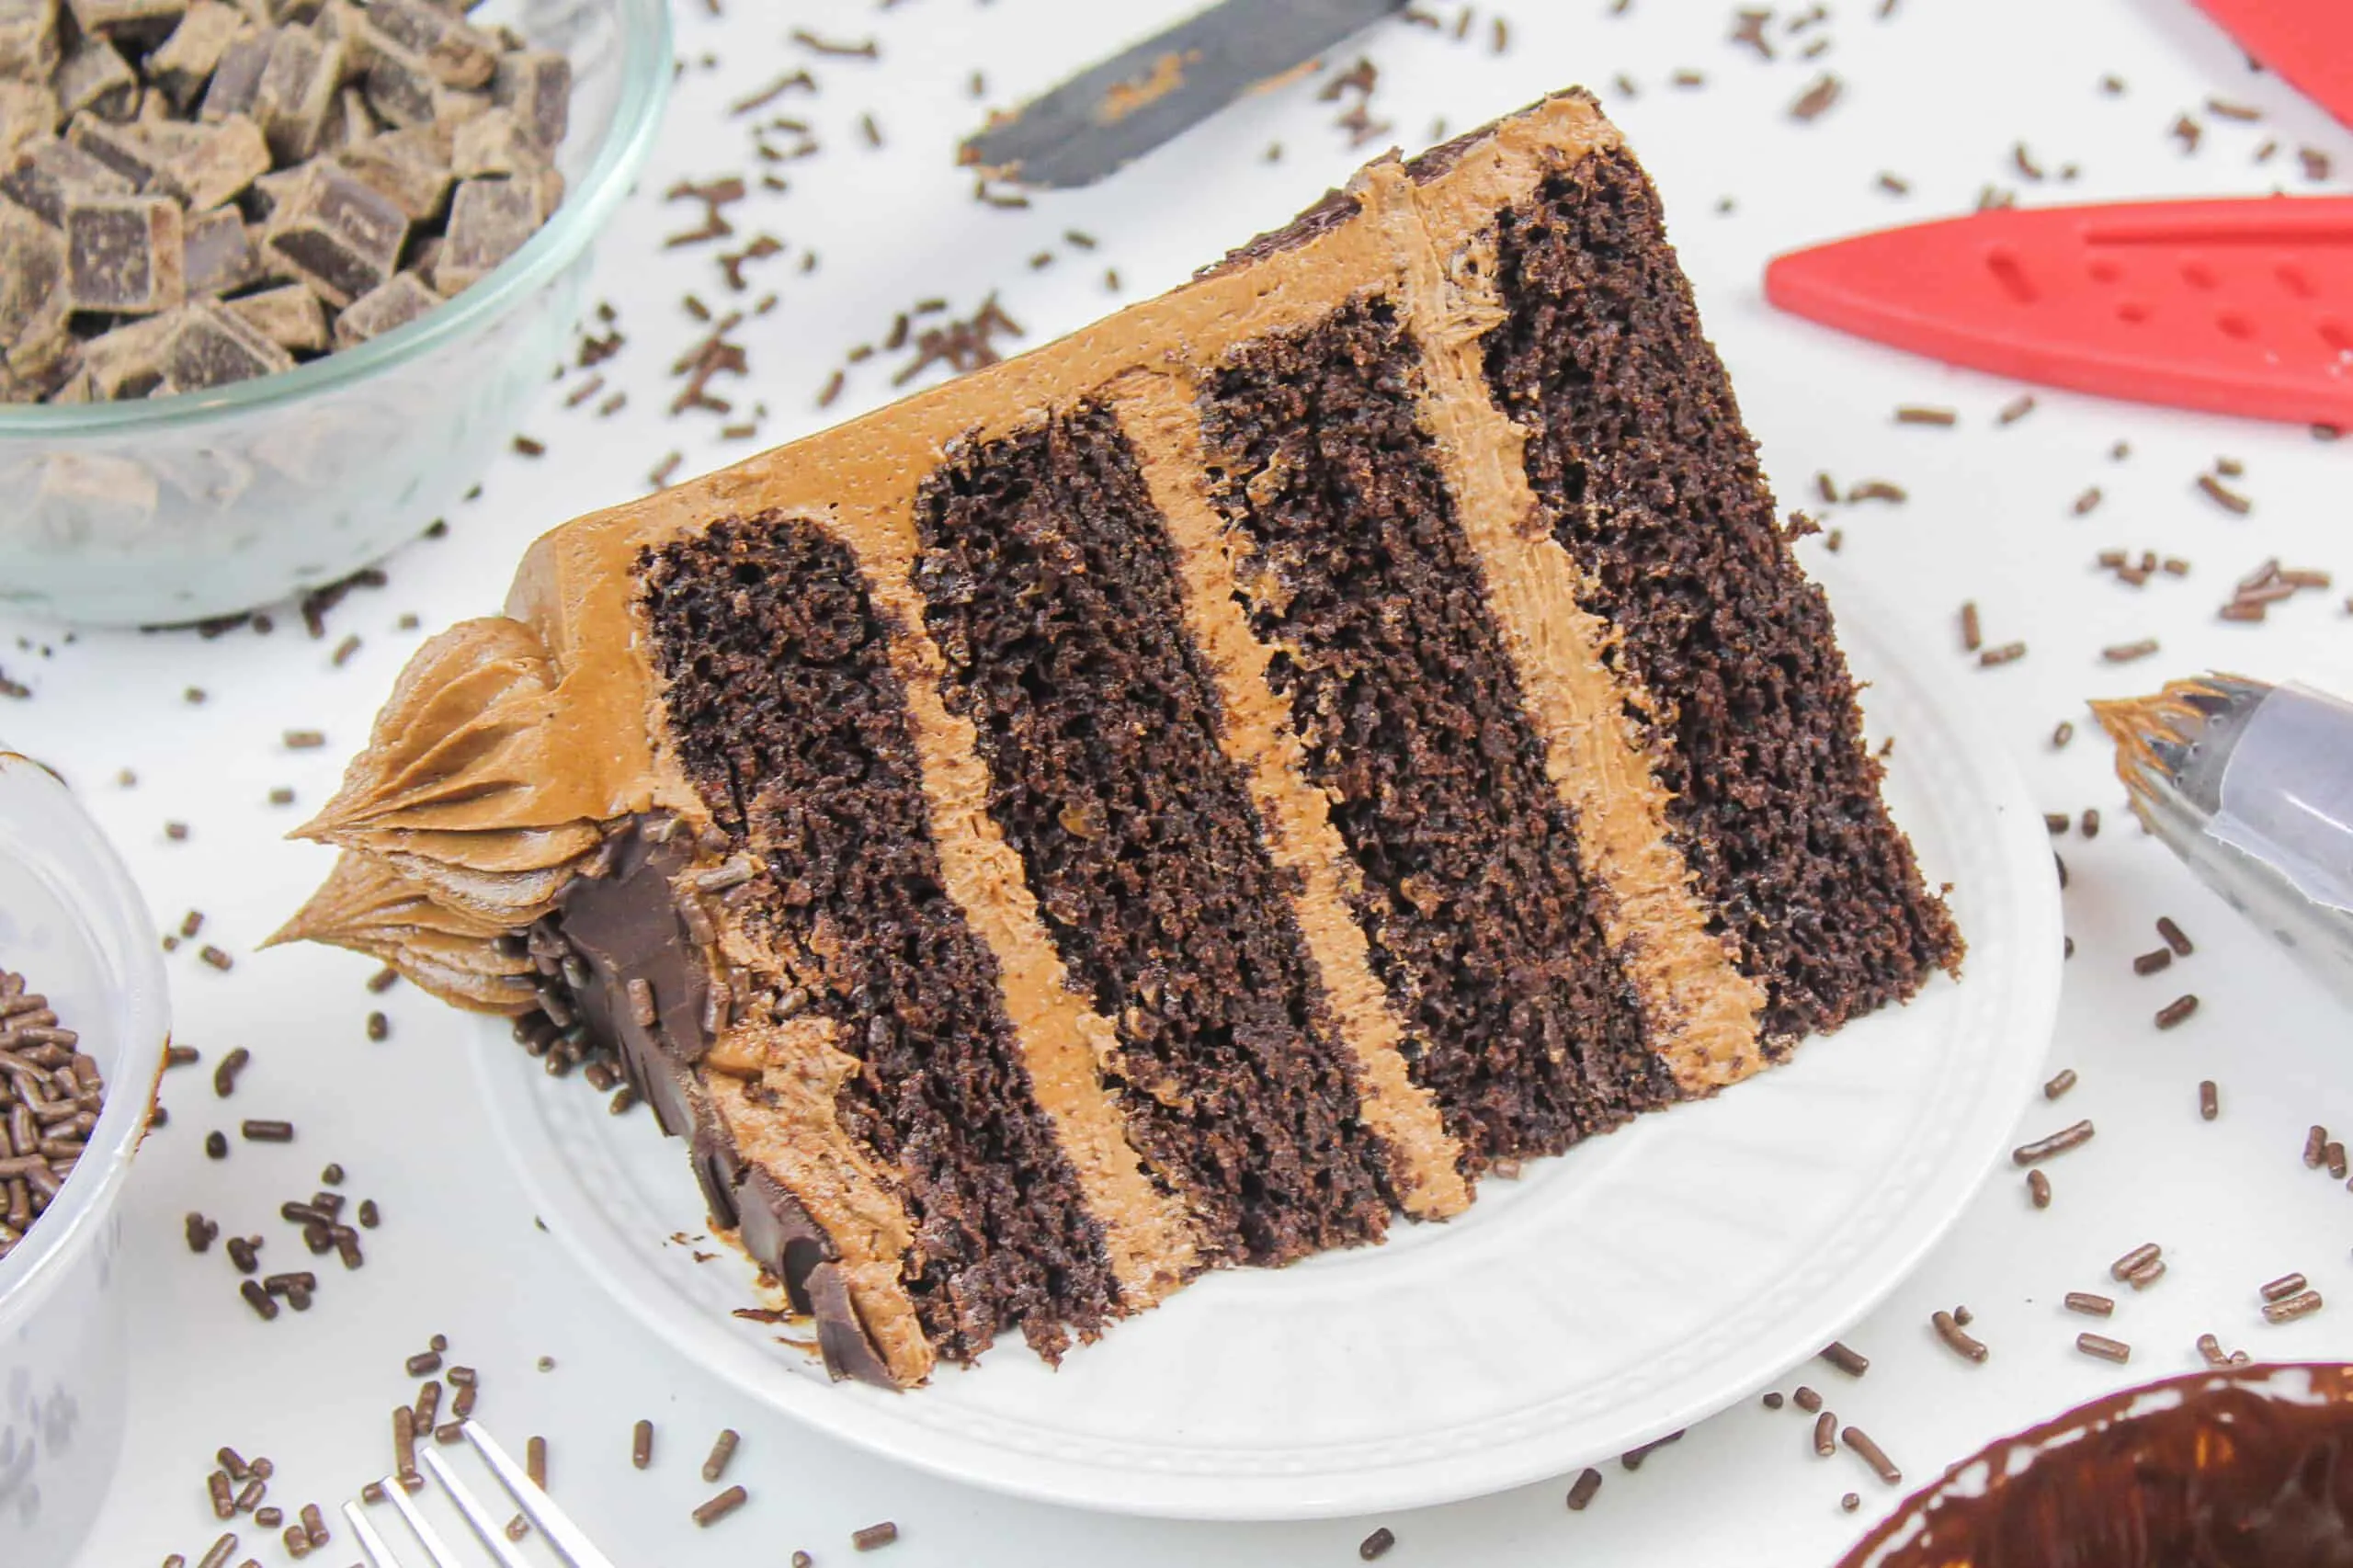 Gluten Free Chocolate Cake Recipe With Decadent Chocolate Frosting